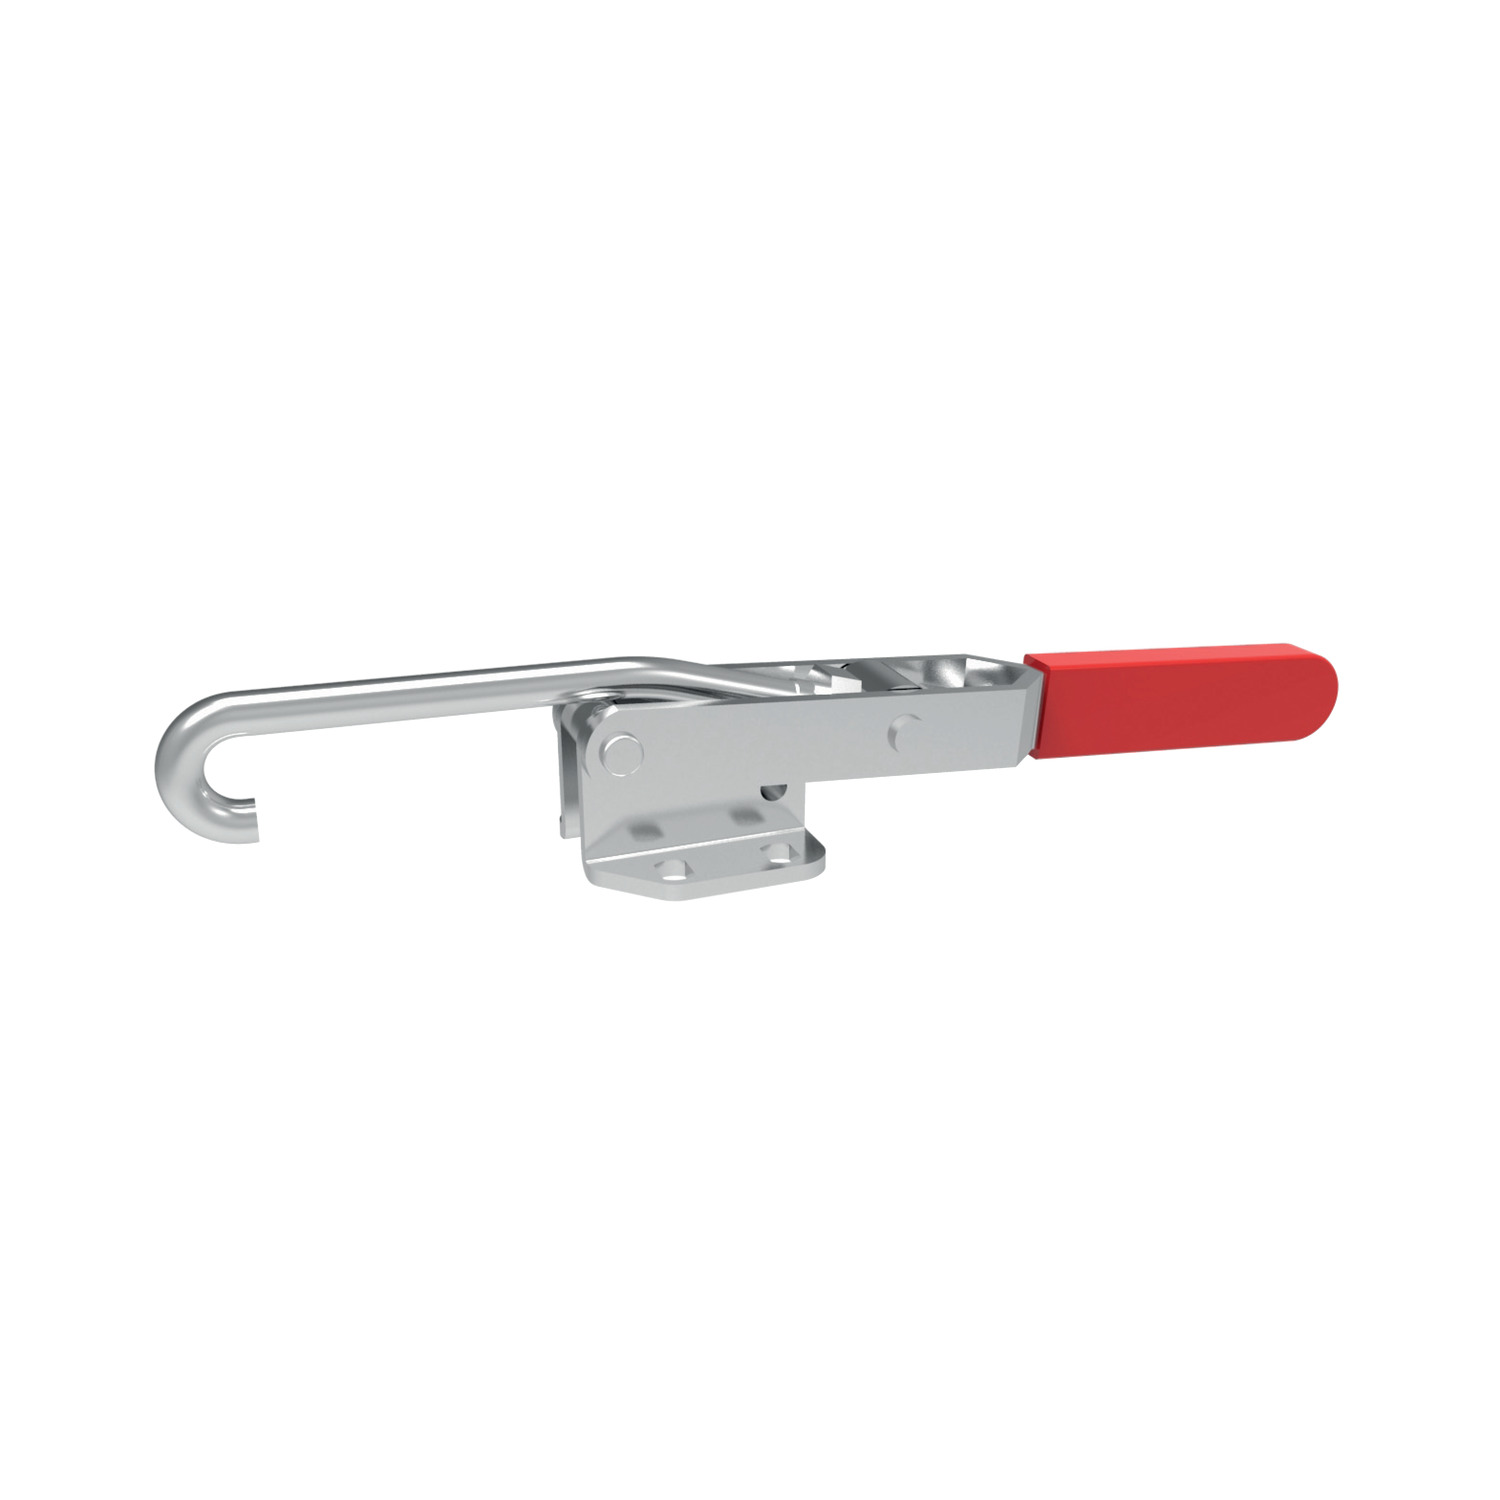 41700.W0301 Hook Type Toggle Clamps - SS. 1 - 1,0 - 8 - 15-23 Also known as TC0440.H0001